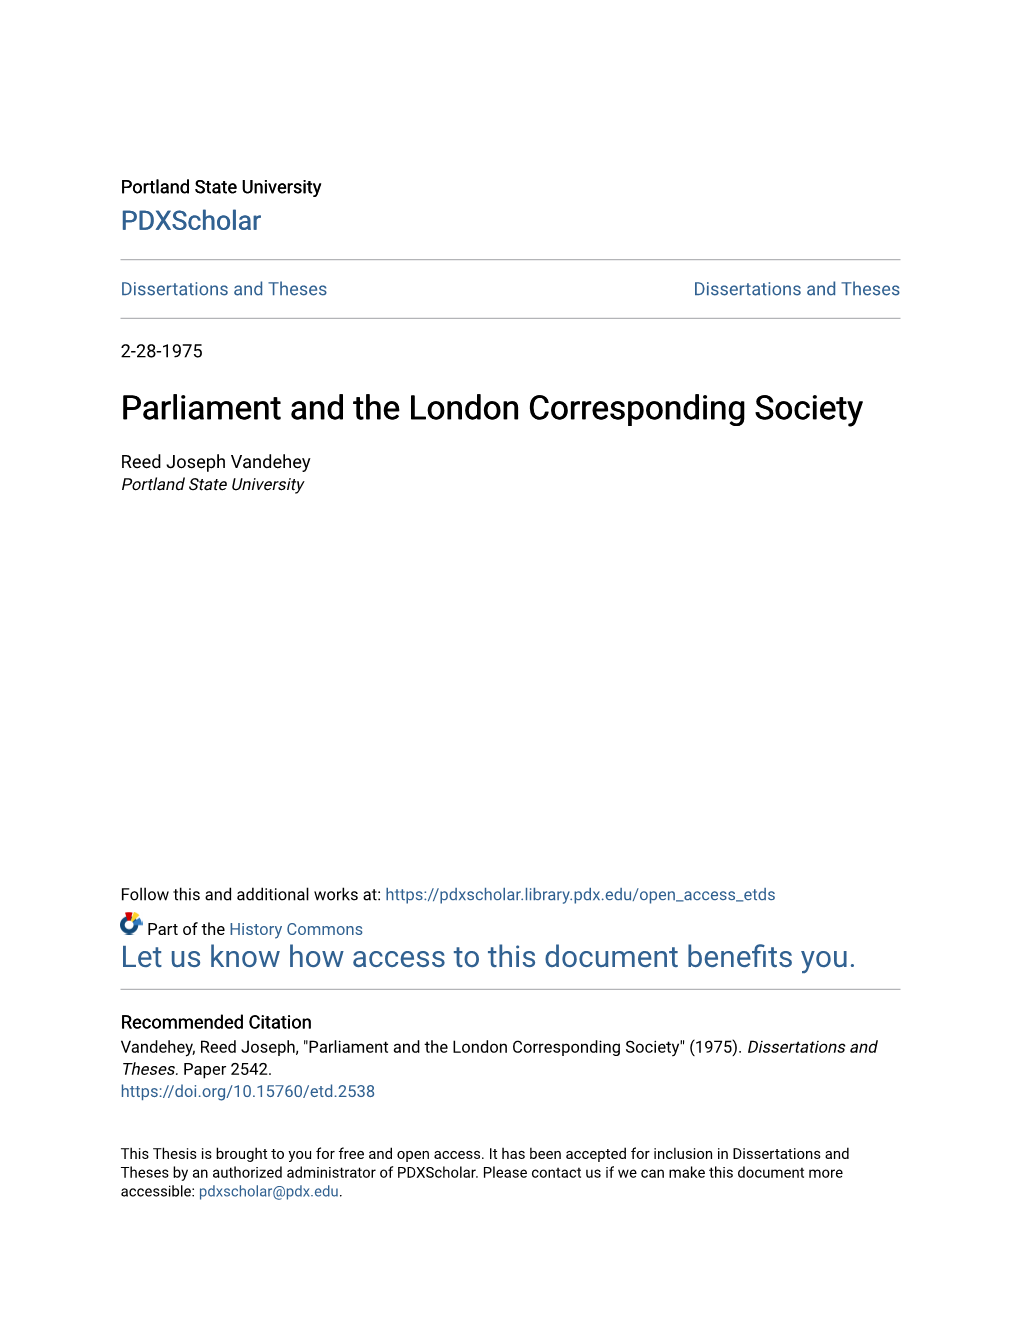 Parliament and the London Corresponding Society